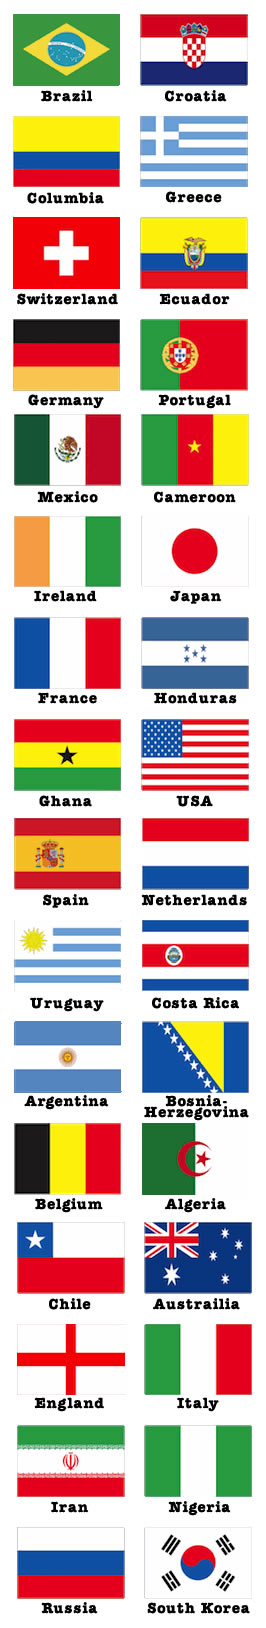 World Cup Quiz 2014 - Flags